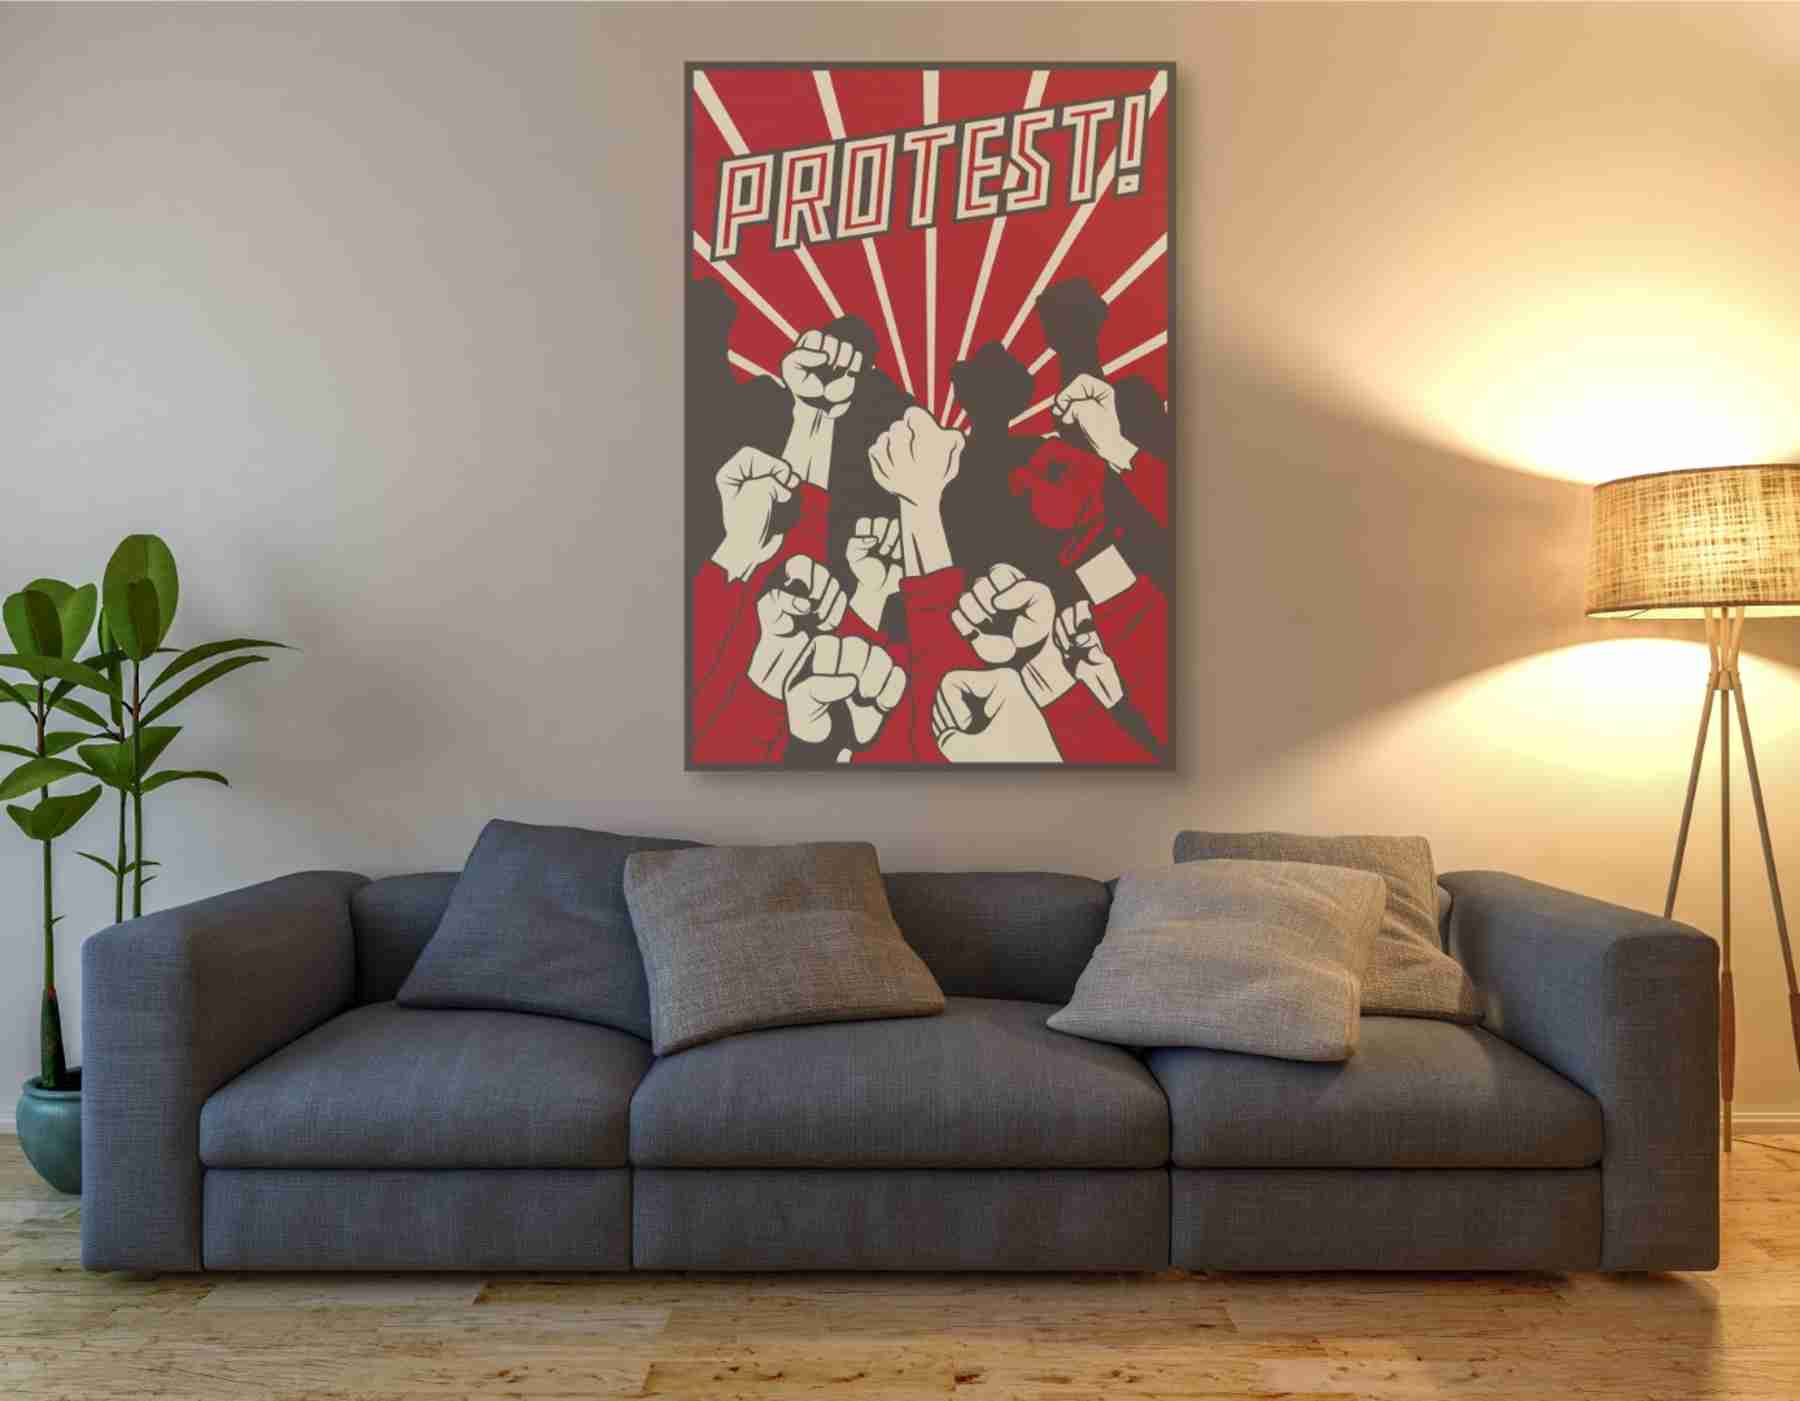 Epic Graffiti 'Protest' Giclee Canvas Wall Art 